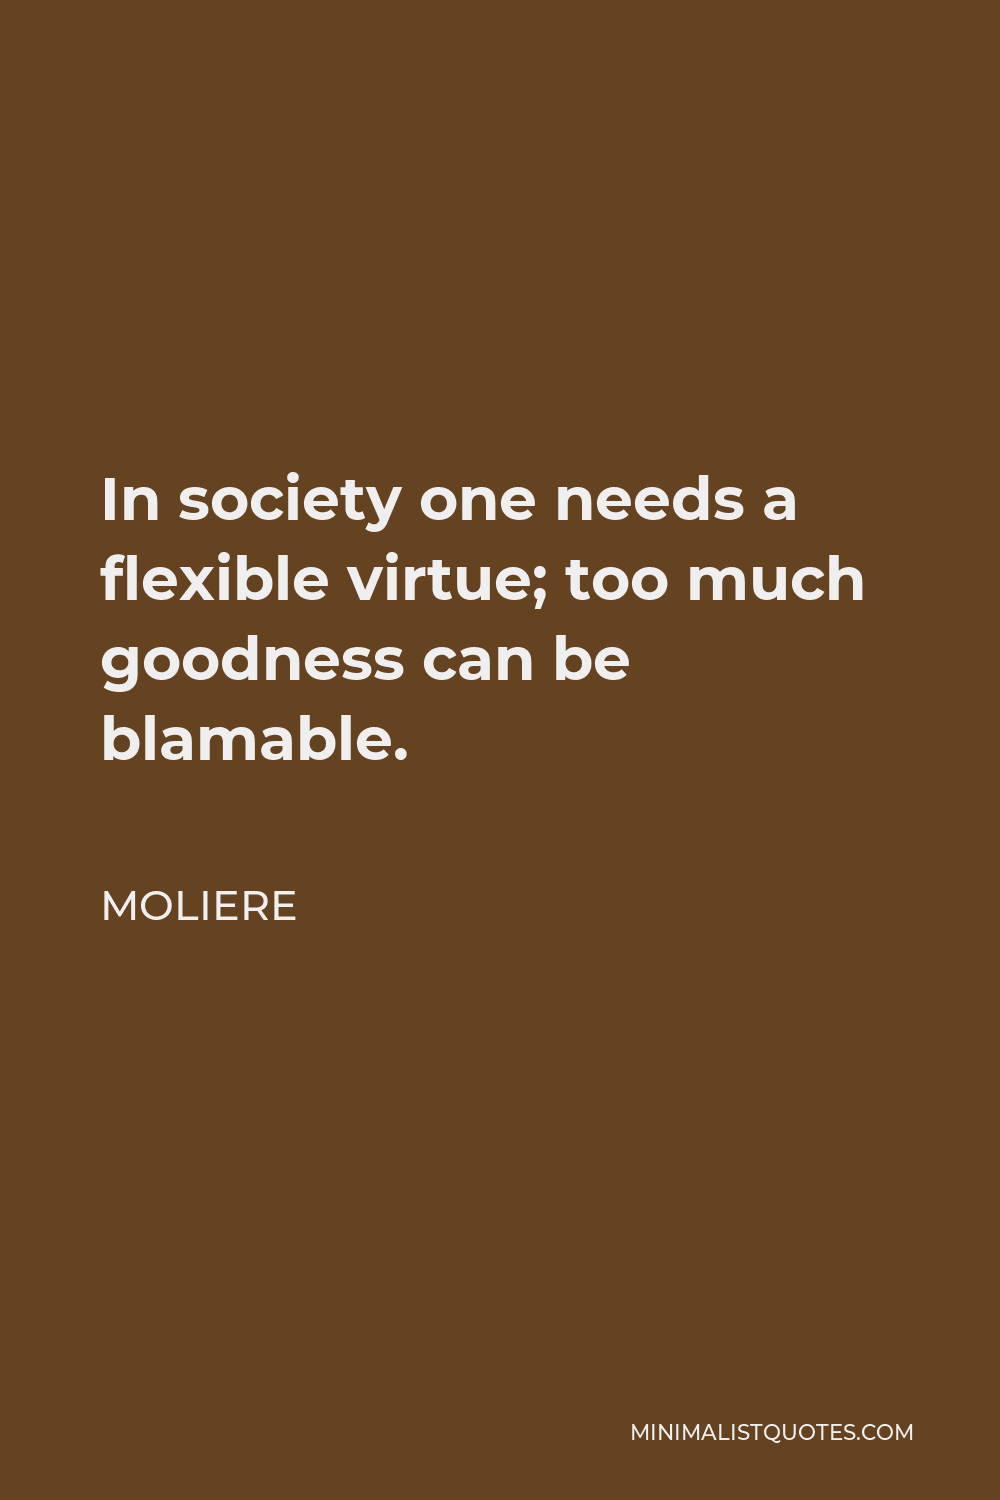 Moliere Quote - In society one needs a flexible virtue; too much goodness can be blamable.